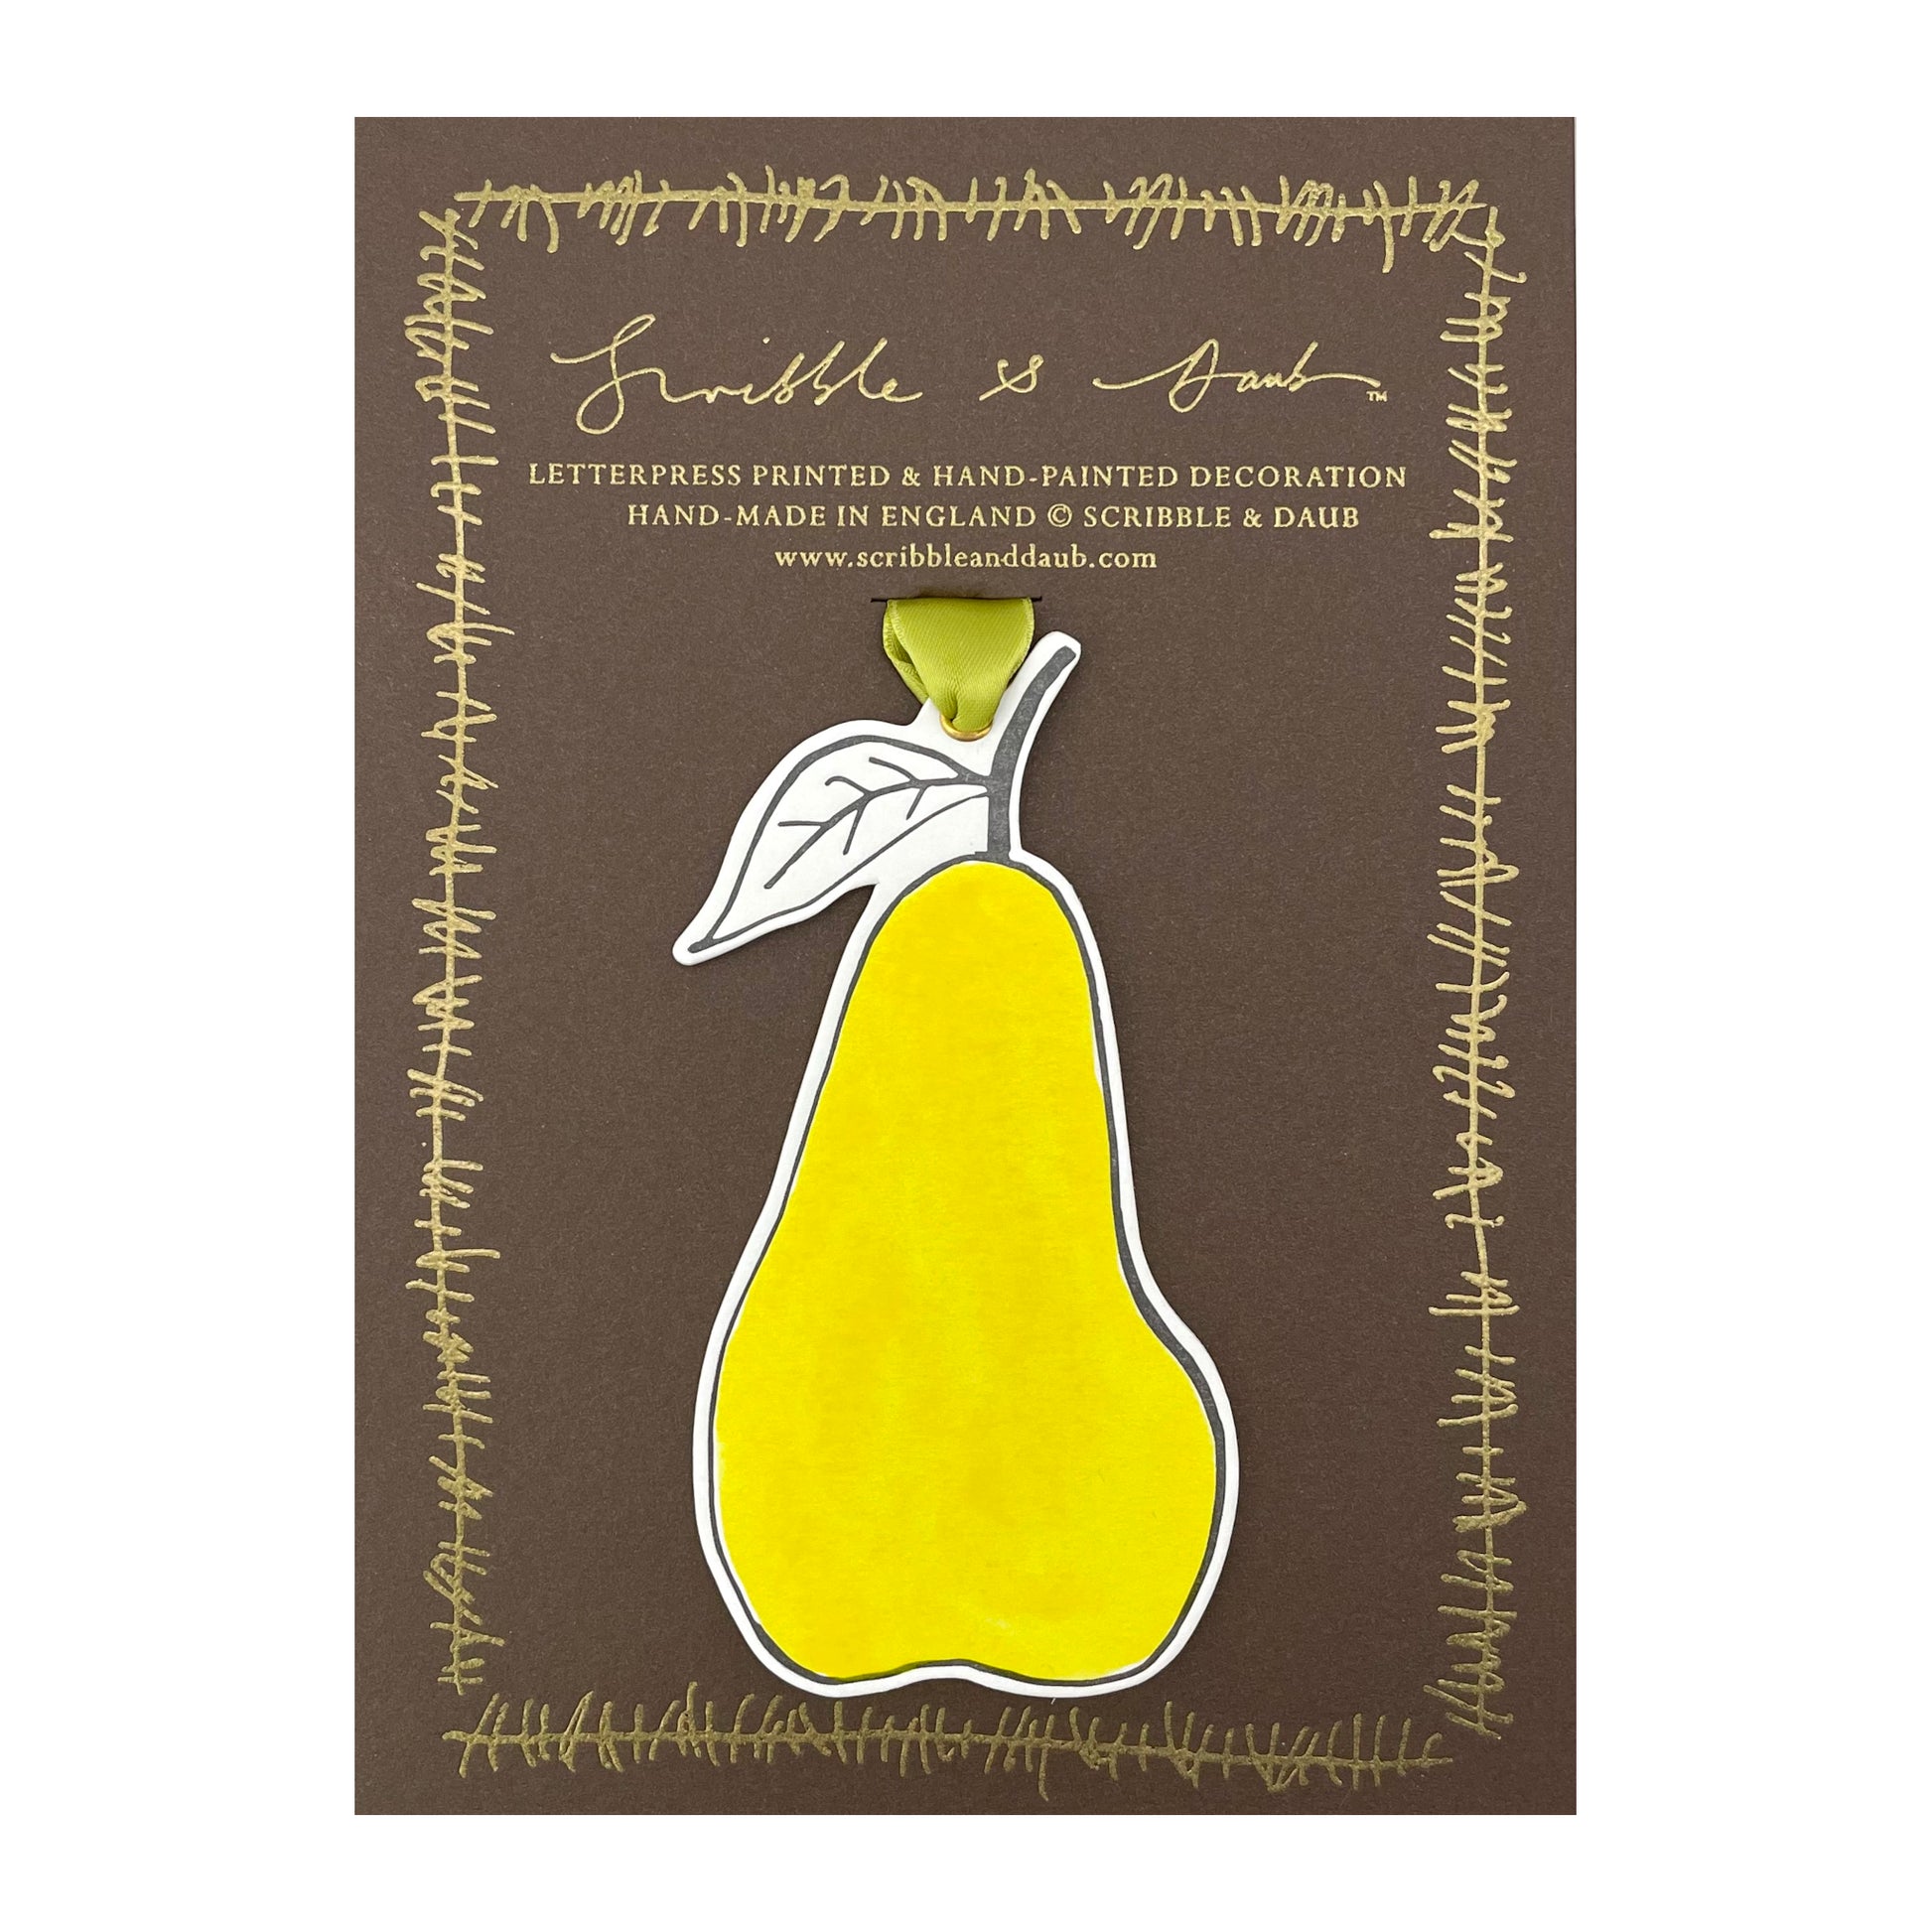 a pear shaped hanging ornament made of thick 1050gsm off-white card, letterpress printed in black and then hand painted in bright yellow ink. It has a chartreuse green satin ribbon to hang the ornament with. By Scribble & Daub. Presented on a gold-foiled brown board.